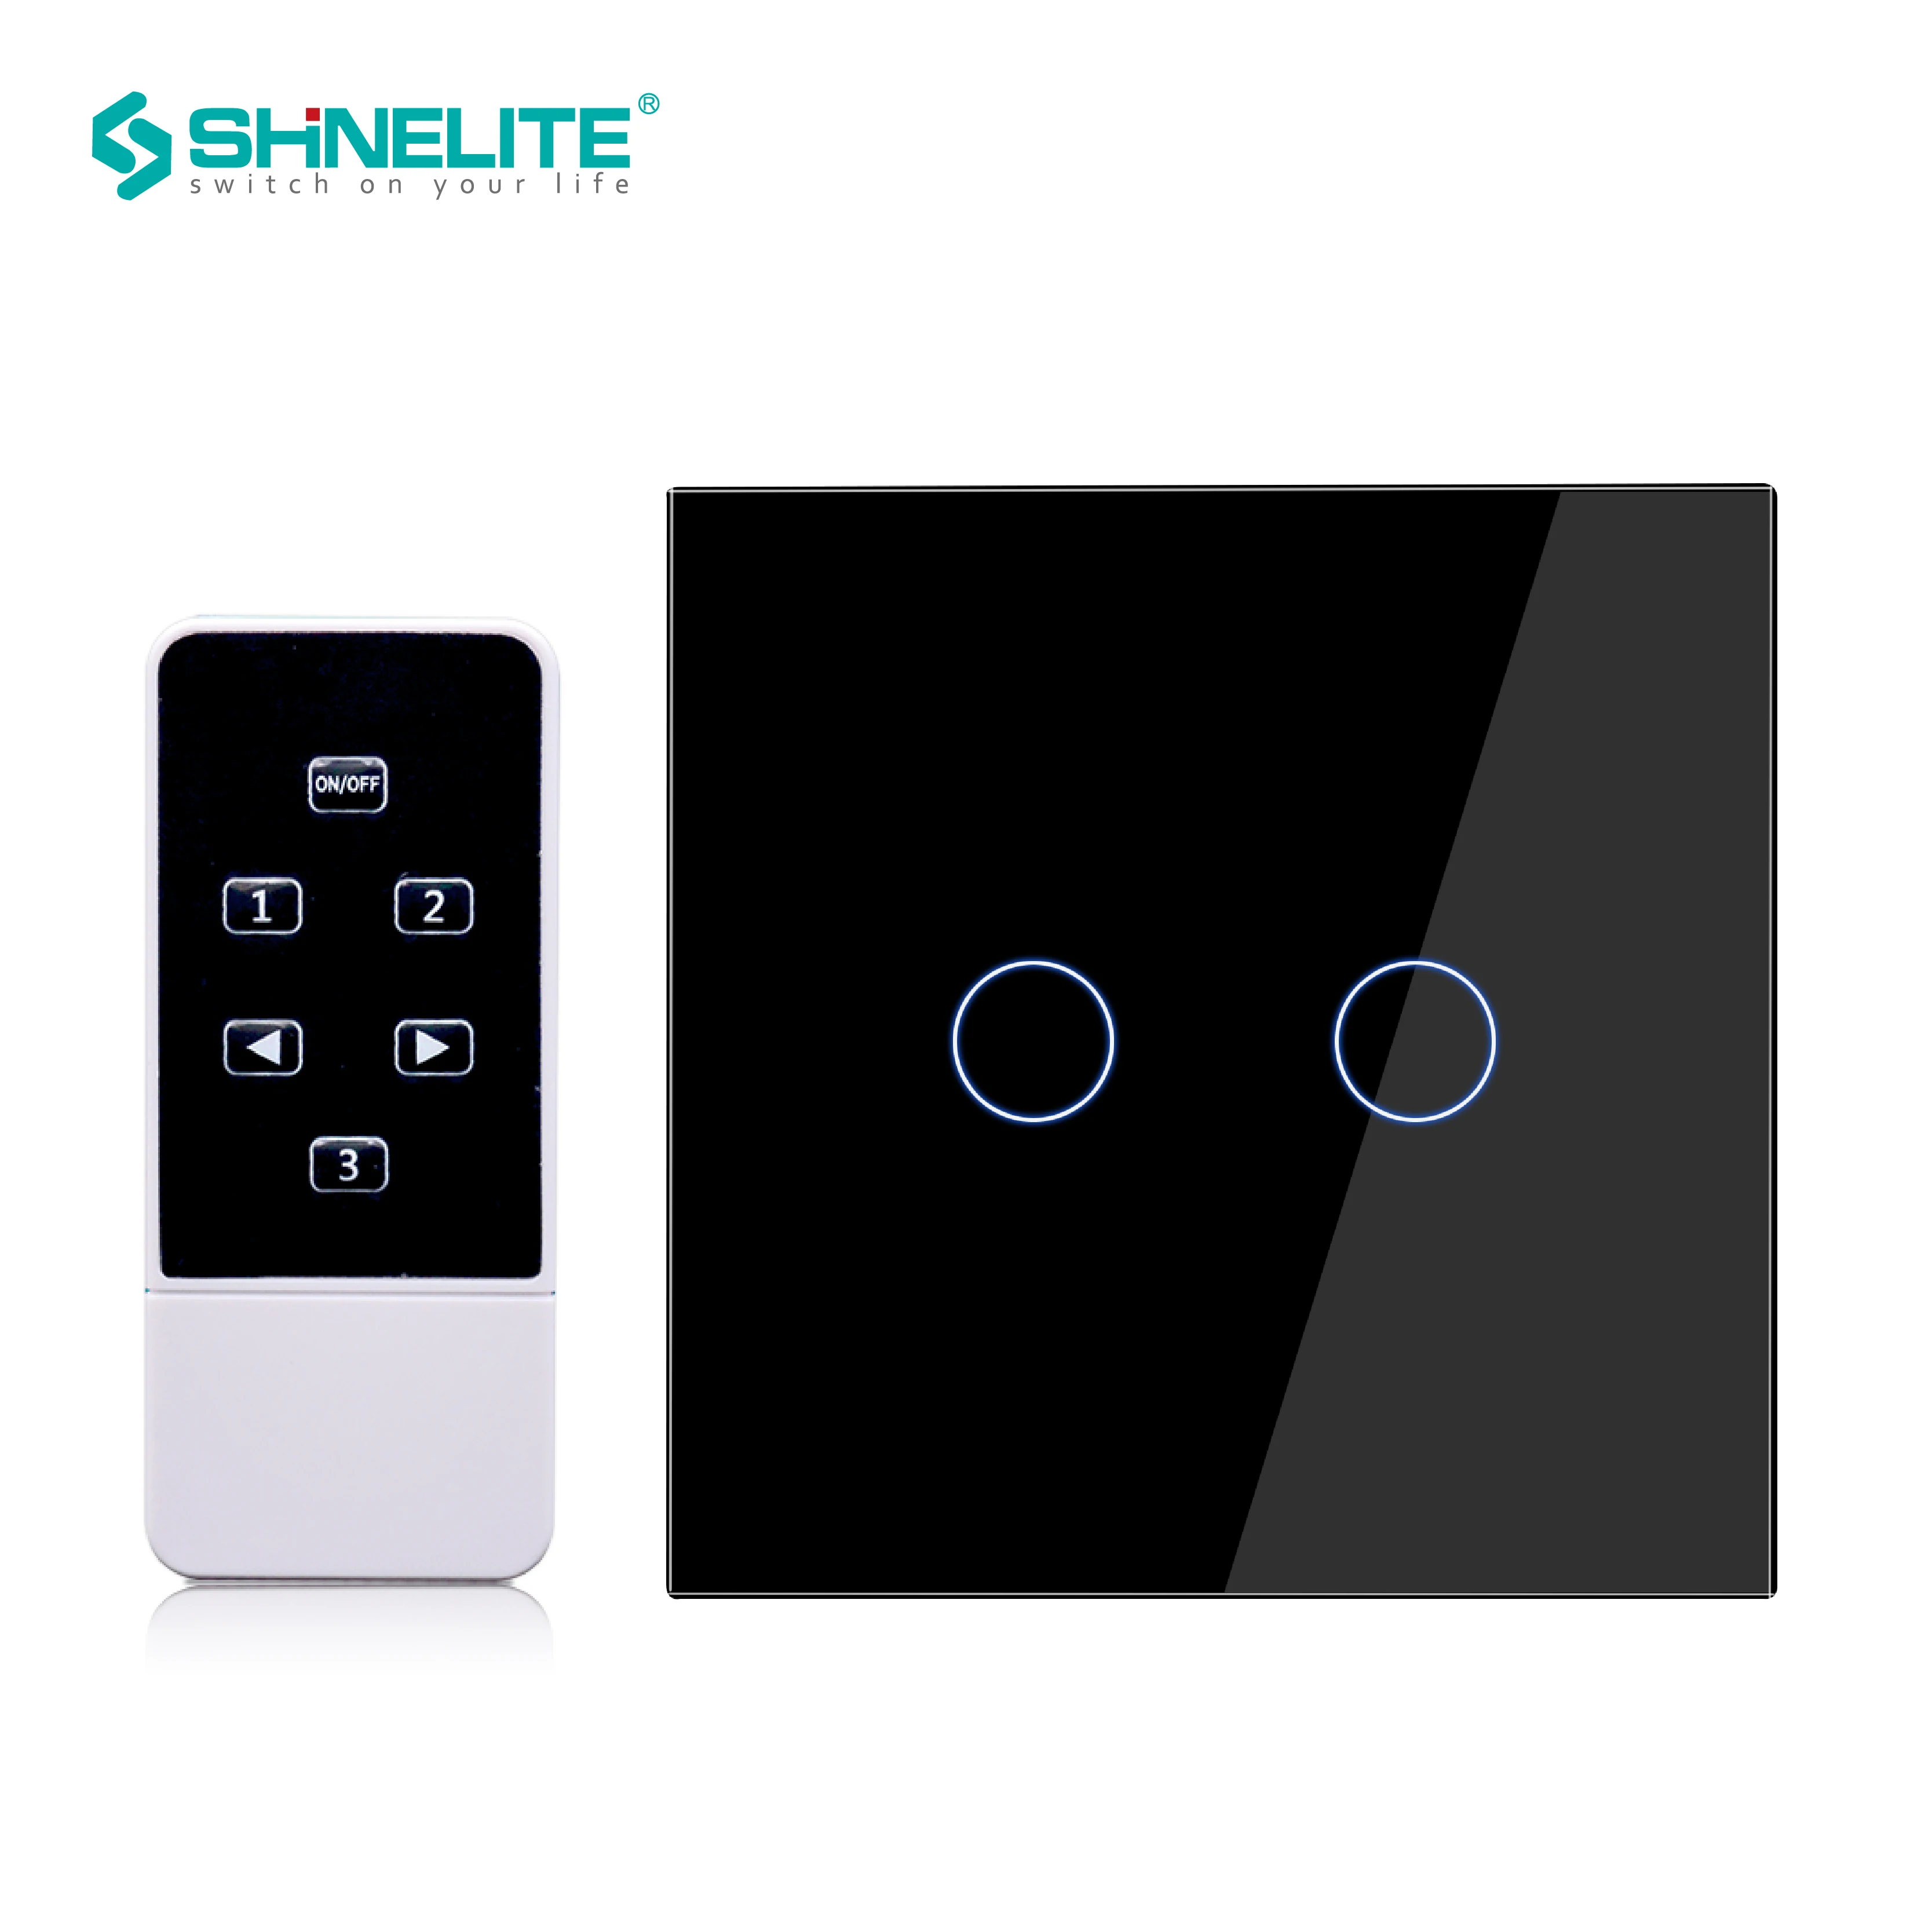 Shinelite Uk Model Home Electronic Touch Wireless Light Switch With Remote  Control,touch Glass Panel 2 Gang 1 Way,rf 433mhz - Switches - AliExpress